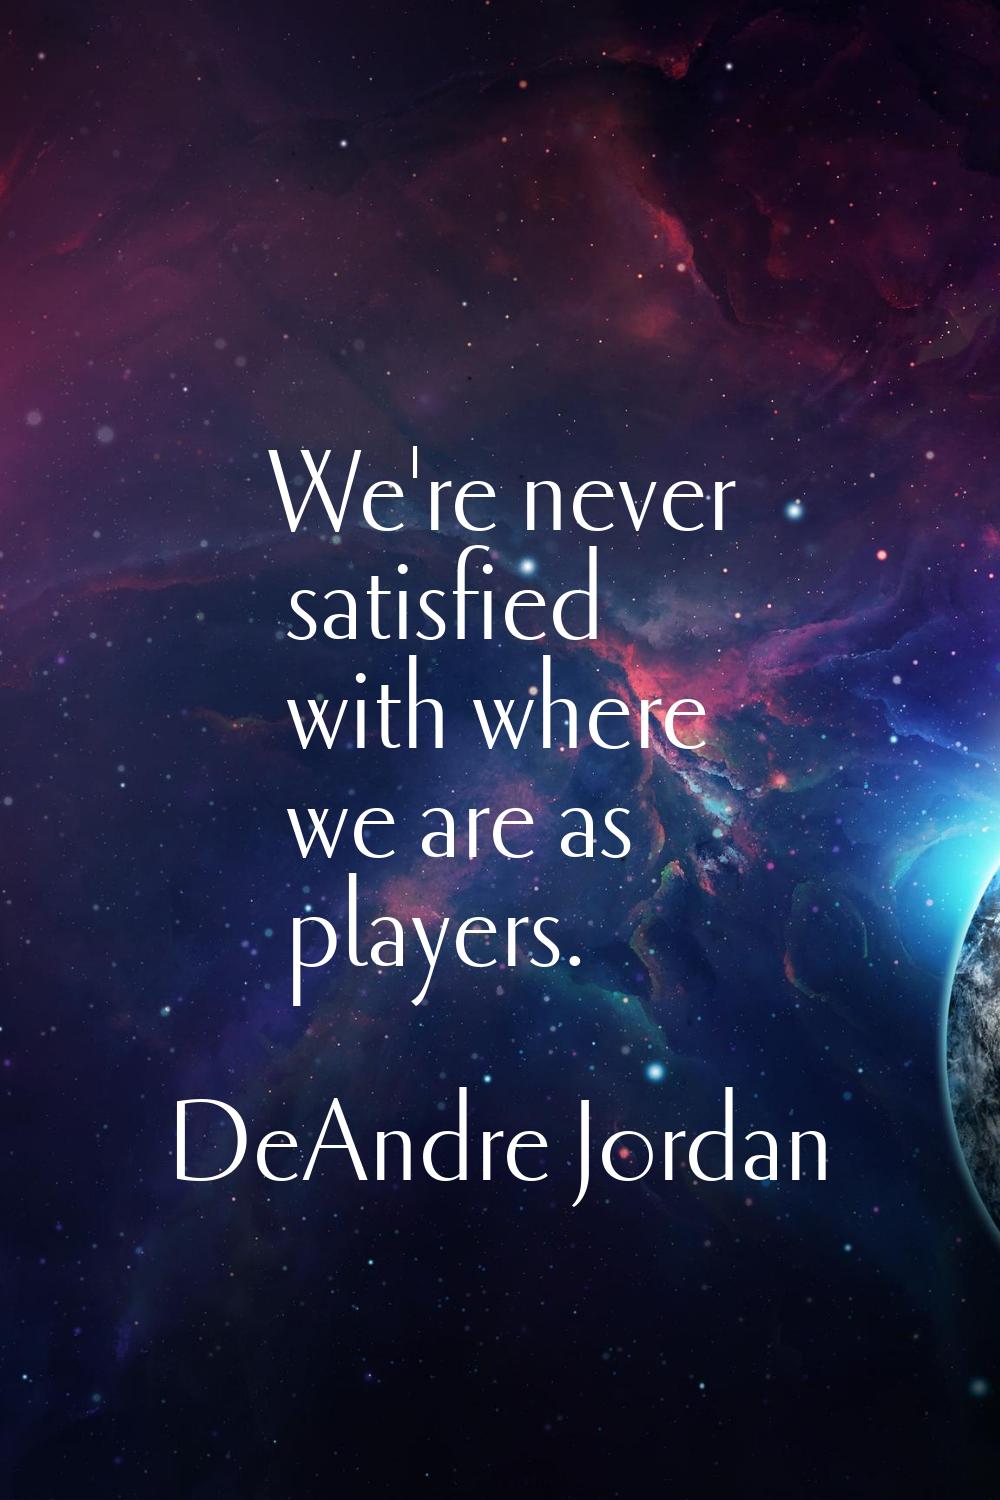 We're never satisfied with where we are as players.